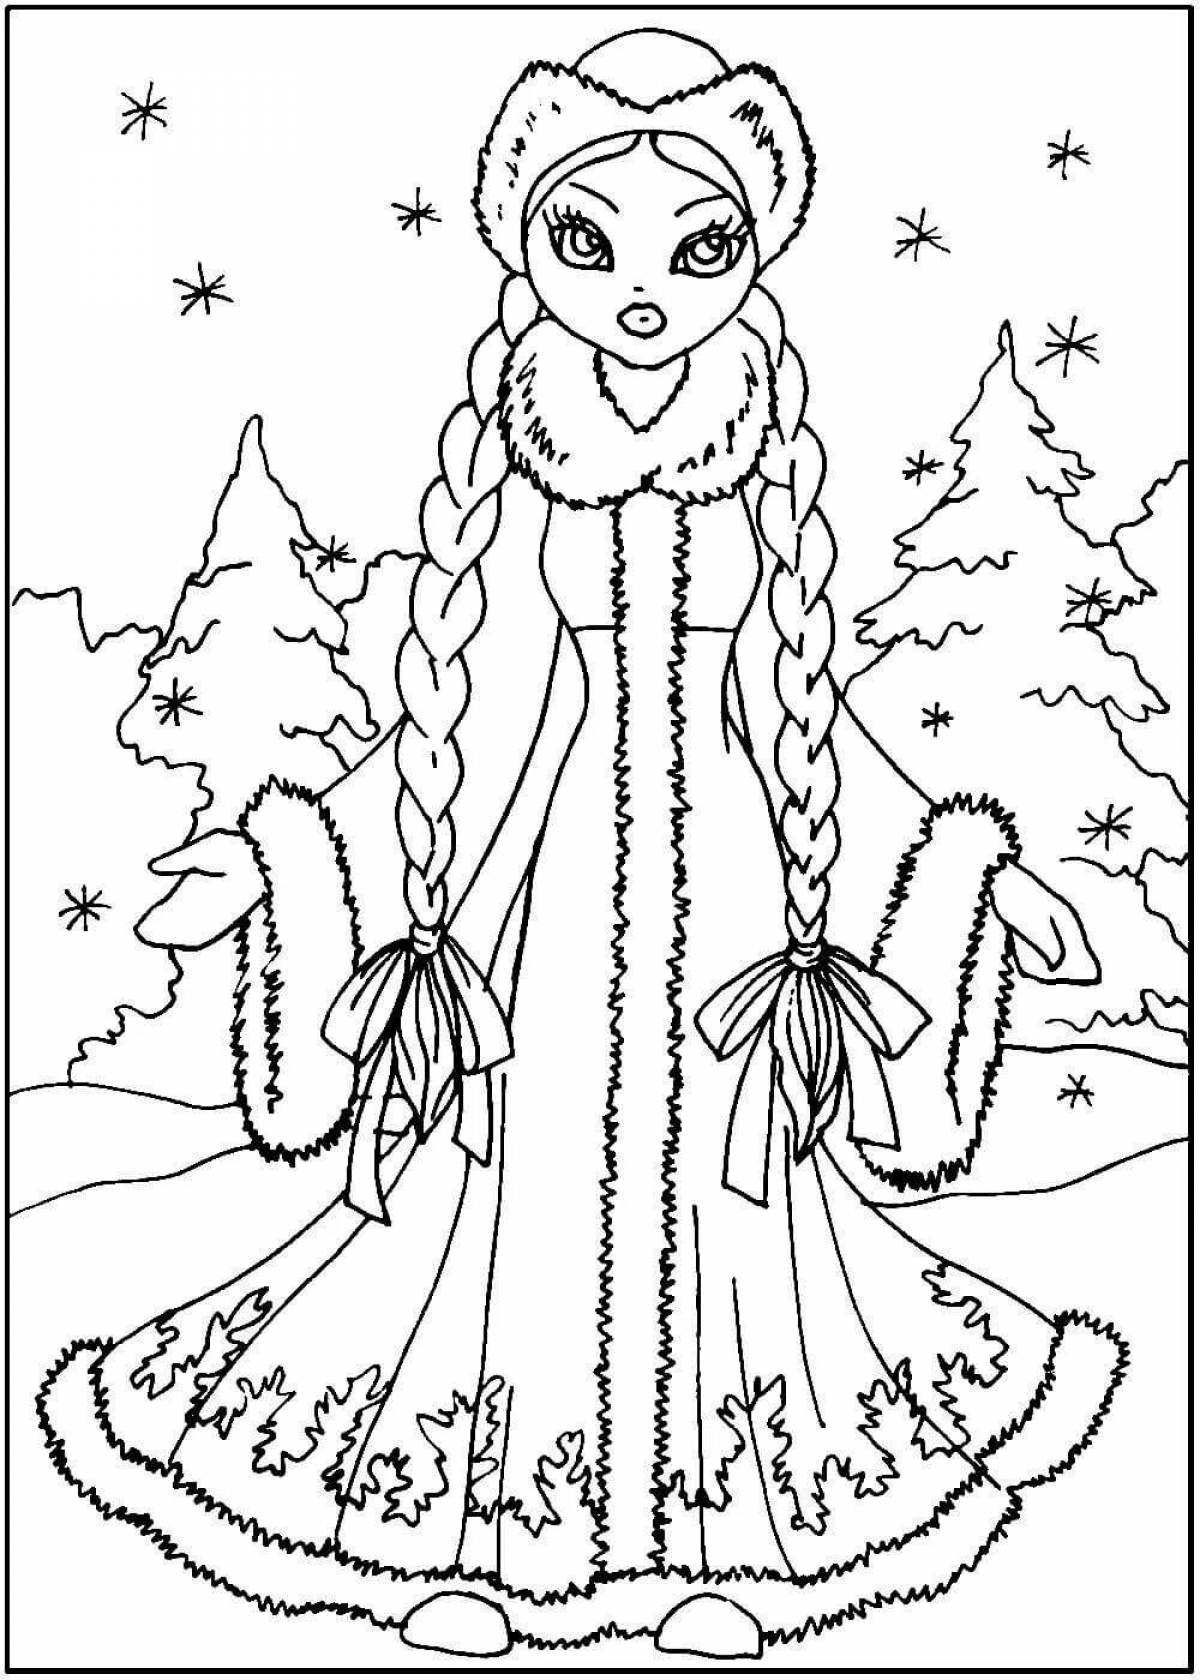 Inspirational fairy tale coloring pages for girls